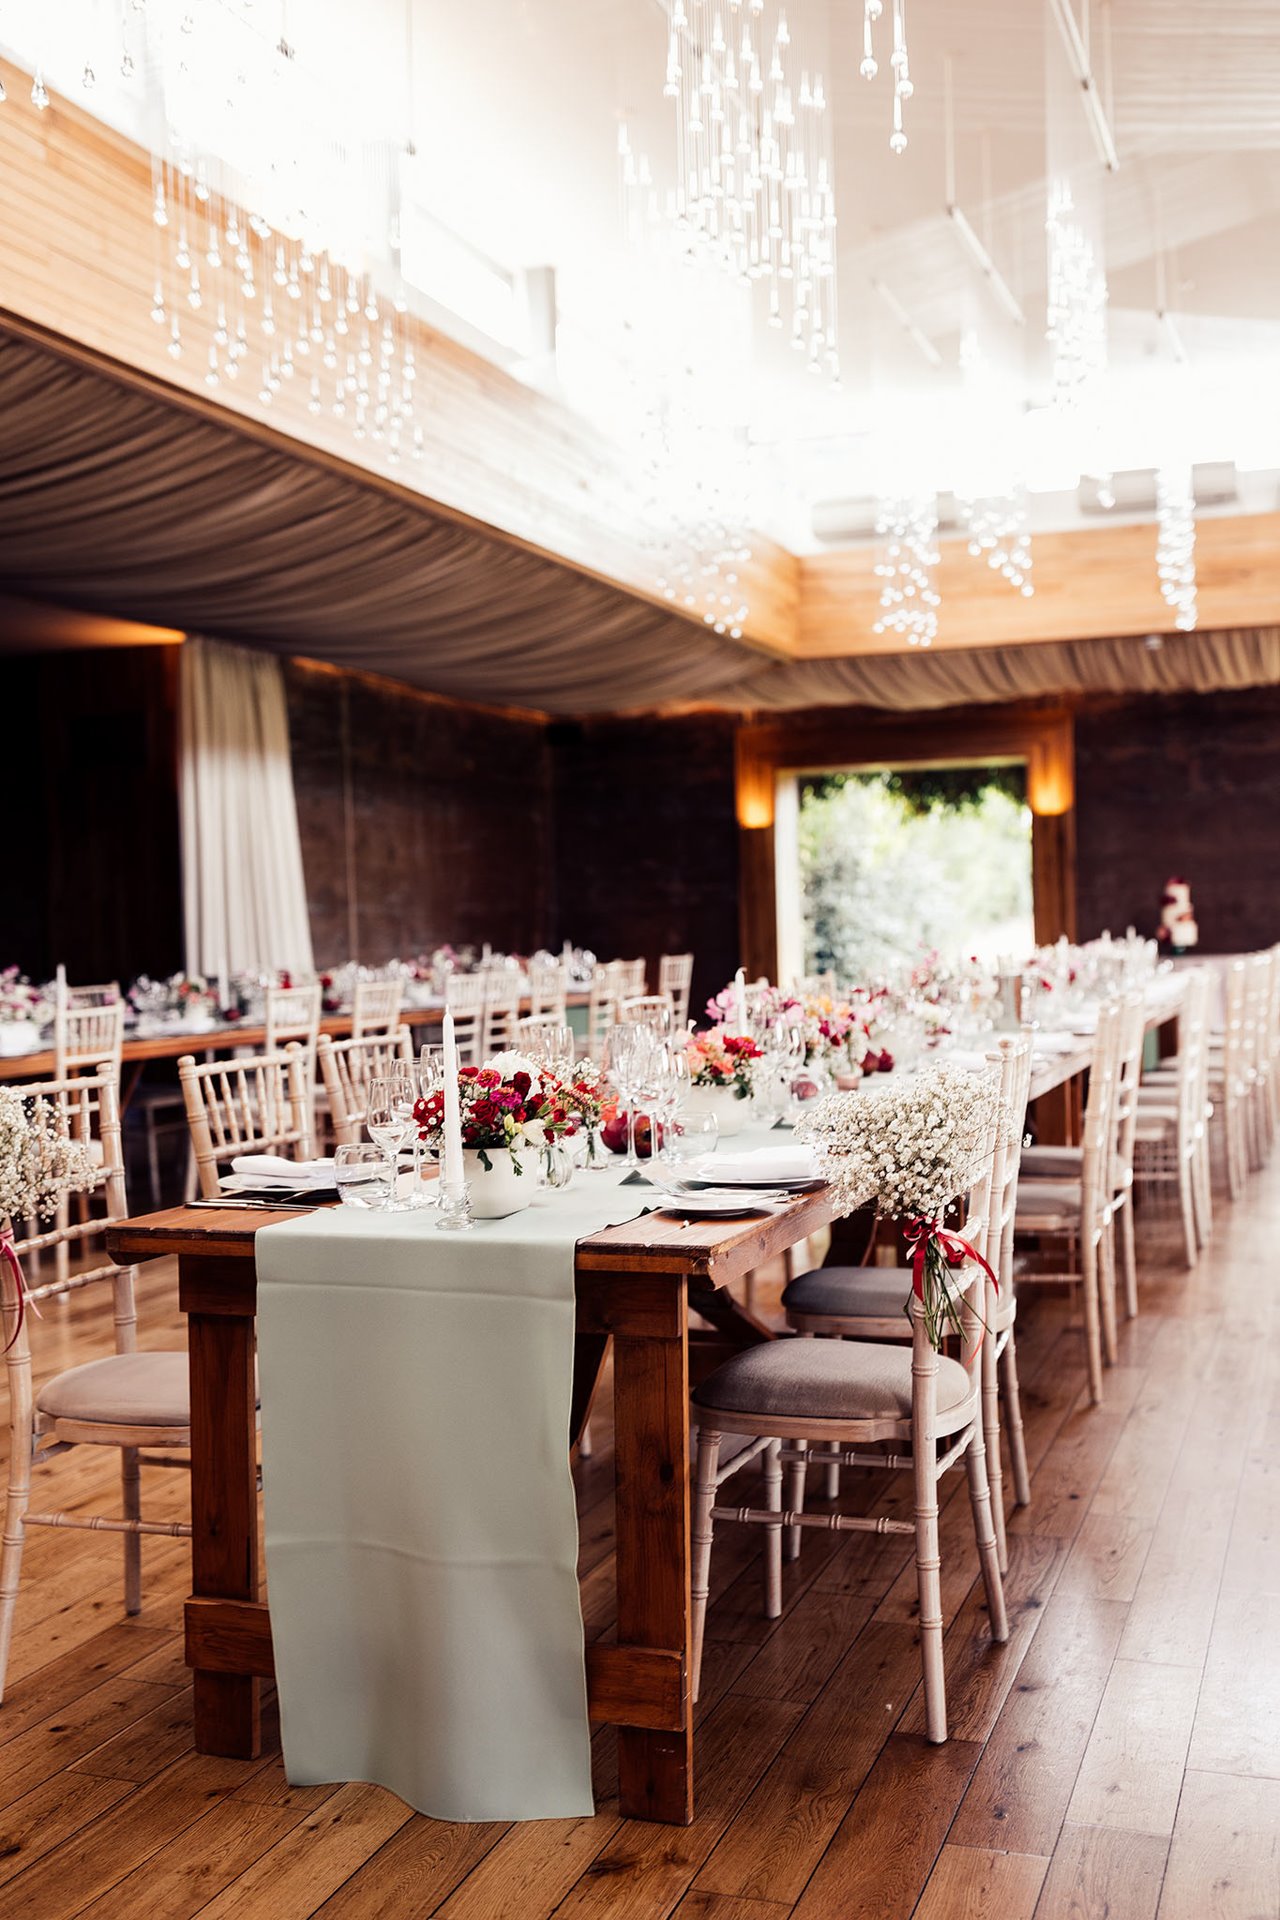 wedding reception with long banqueting tables with pale green linen and pink and red floral details and babys breath decor on chairs